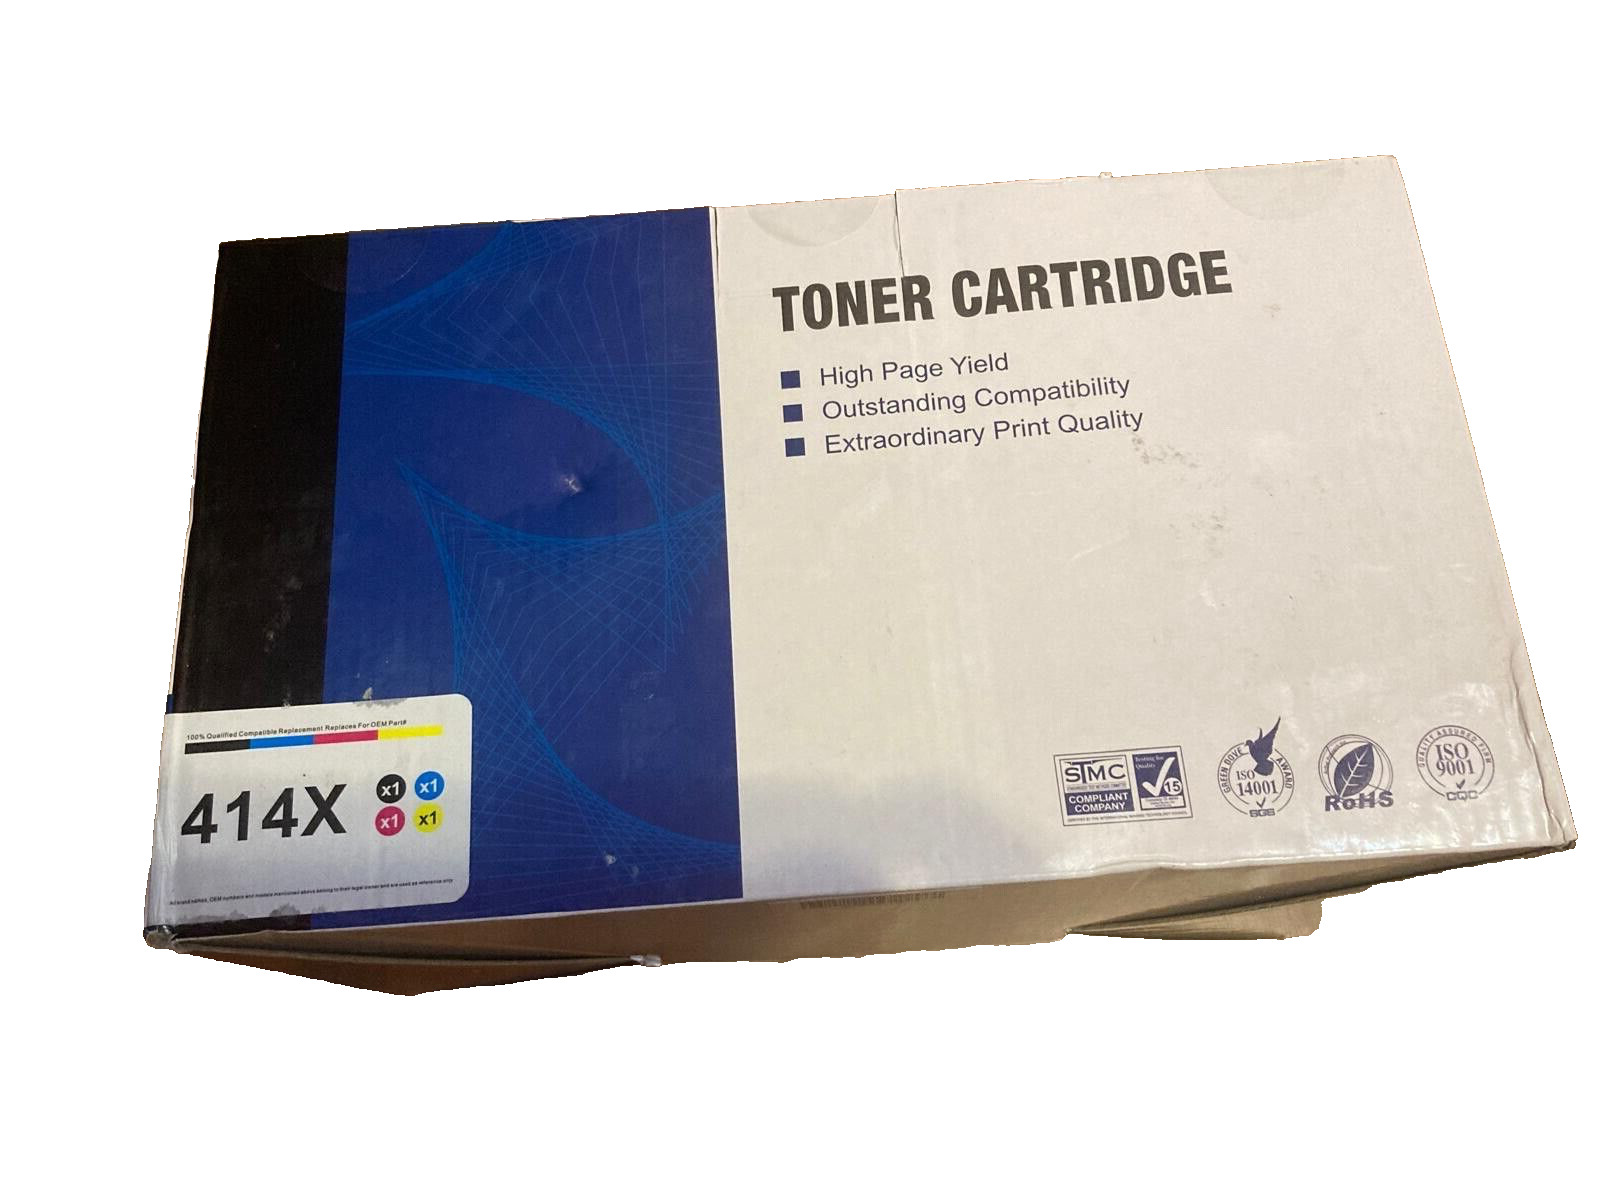 PALMTREE 414X W2020X Toner Replacement for HP 414X Toner Cartridges 4 Pack High